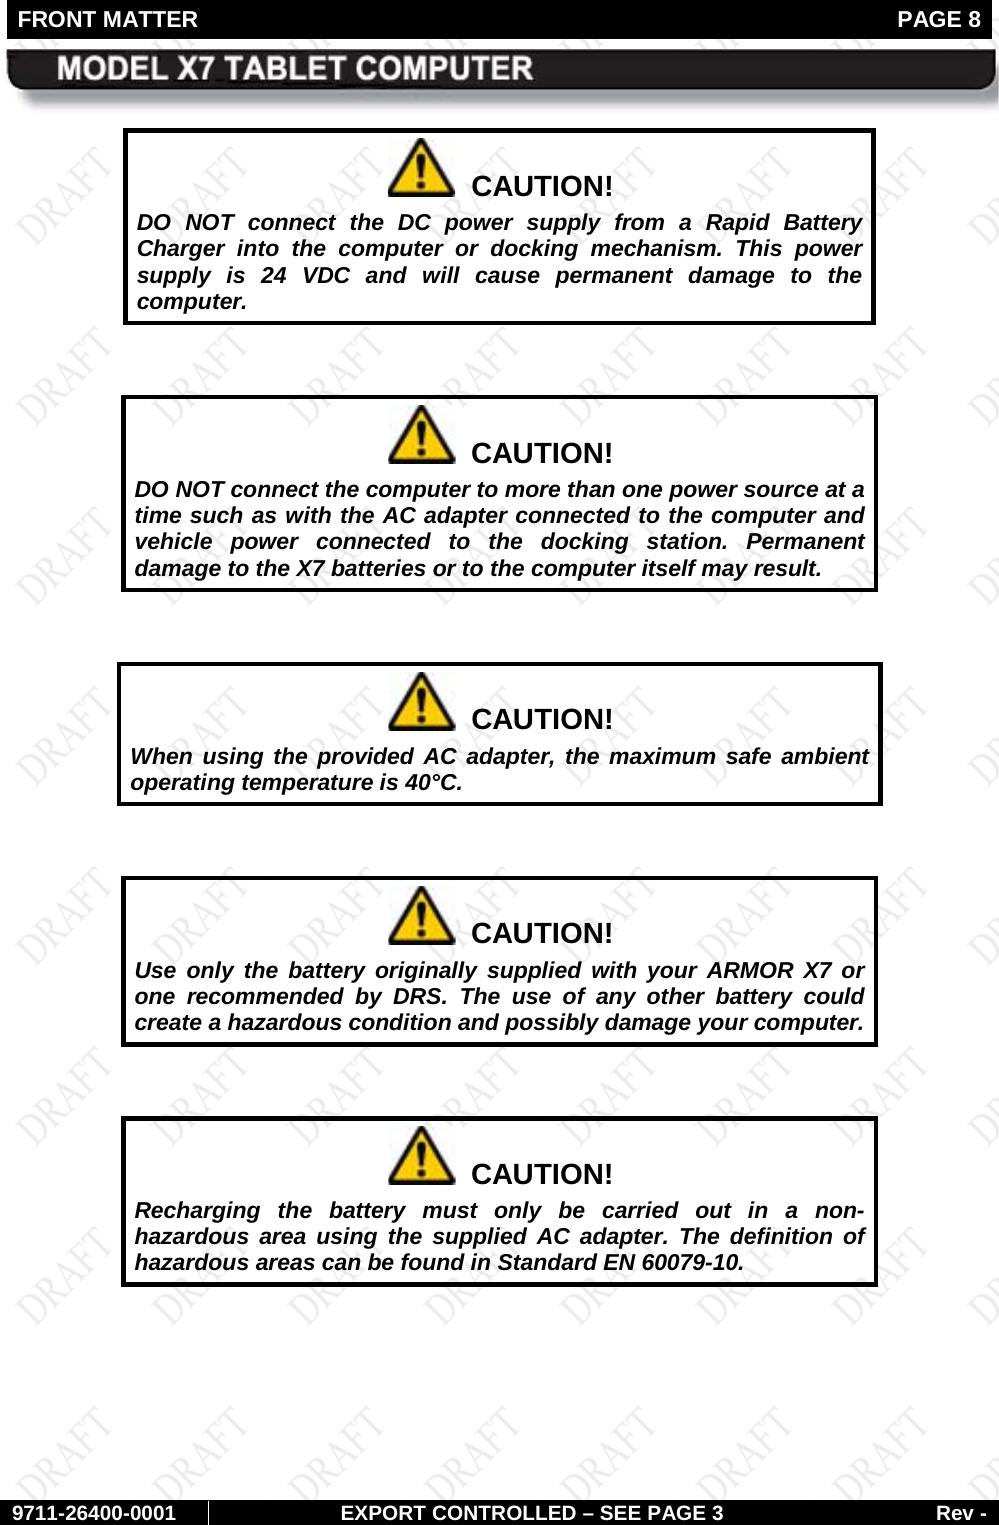 FRONT MATTER   PAGE 8        9711-26400-0001 EXPORT CONTROLLED – SEE PAGE 3 Rev -   CAUTION! DO NOT connect the DC power supply from a Rapid Battery Charger into the computer or docking mechanism. This power supply is 24 VDC and will cause permanent damage to the computer.    CAUTION! DO NOT connect the computer to more than one power source at a time such as with the AC adapter connected to the computer and vehicle power connected to the docking station. Permanent damage to the X7 batteries or to the computer itself may result.    CAUTION! When using the provided AC adapter, the maximum safe ambient operating temperature is 40°C.    CAUTION! Use only the battery originally supplied with your ARMOR X7 or one recommended by DRS. The use of any other battery could create a hazardous condition and possibly damage your computer.    CAUTION! Recharging the battery must only be carried out in a non-hazardous area using the supplied AC adapter. The definition of hazardous areas can be found in Standard EN 60079-10.  